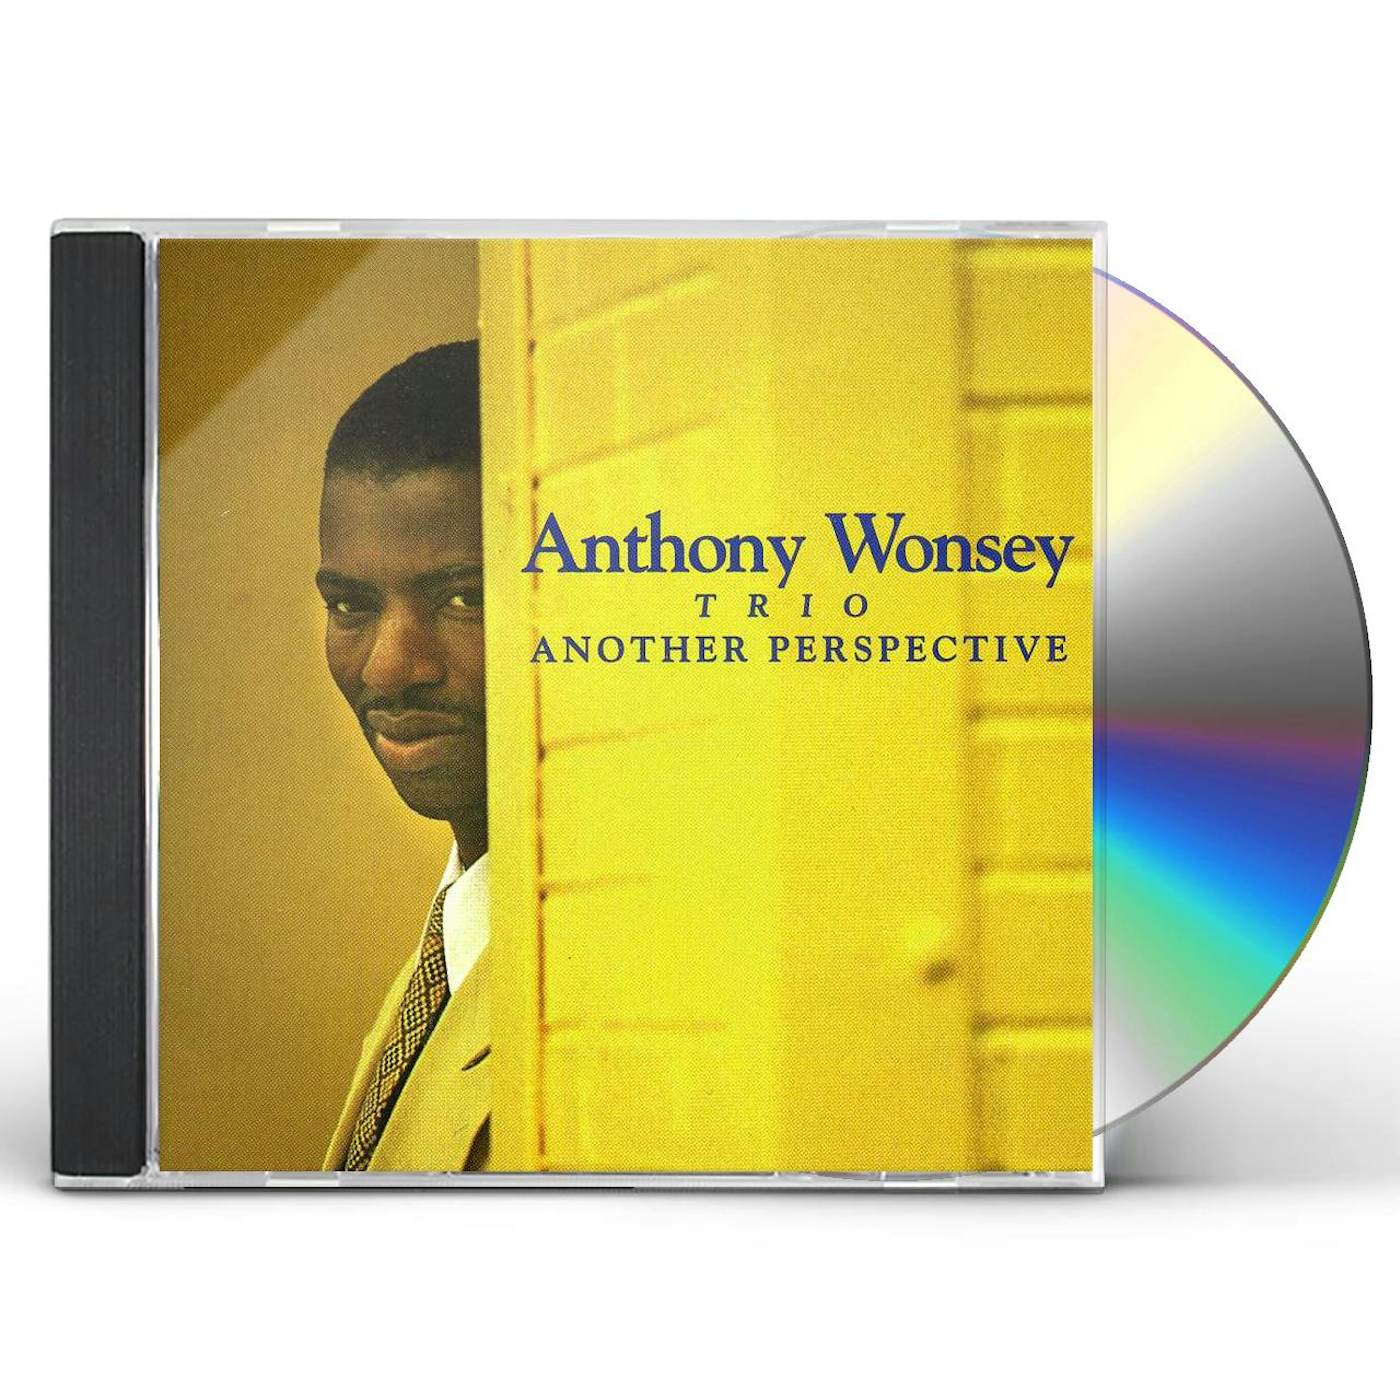 Anthony Wonsey ANOTHER PERSPECTIVE CD